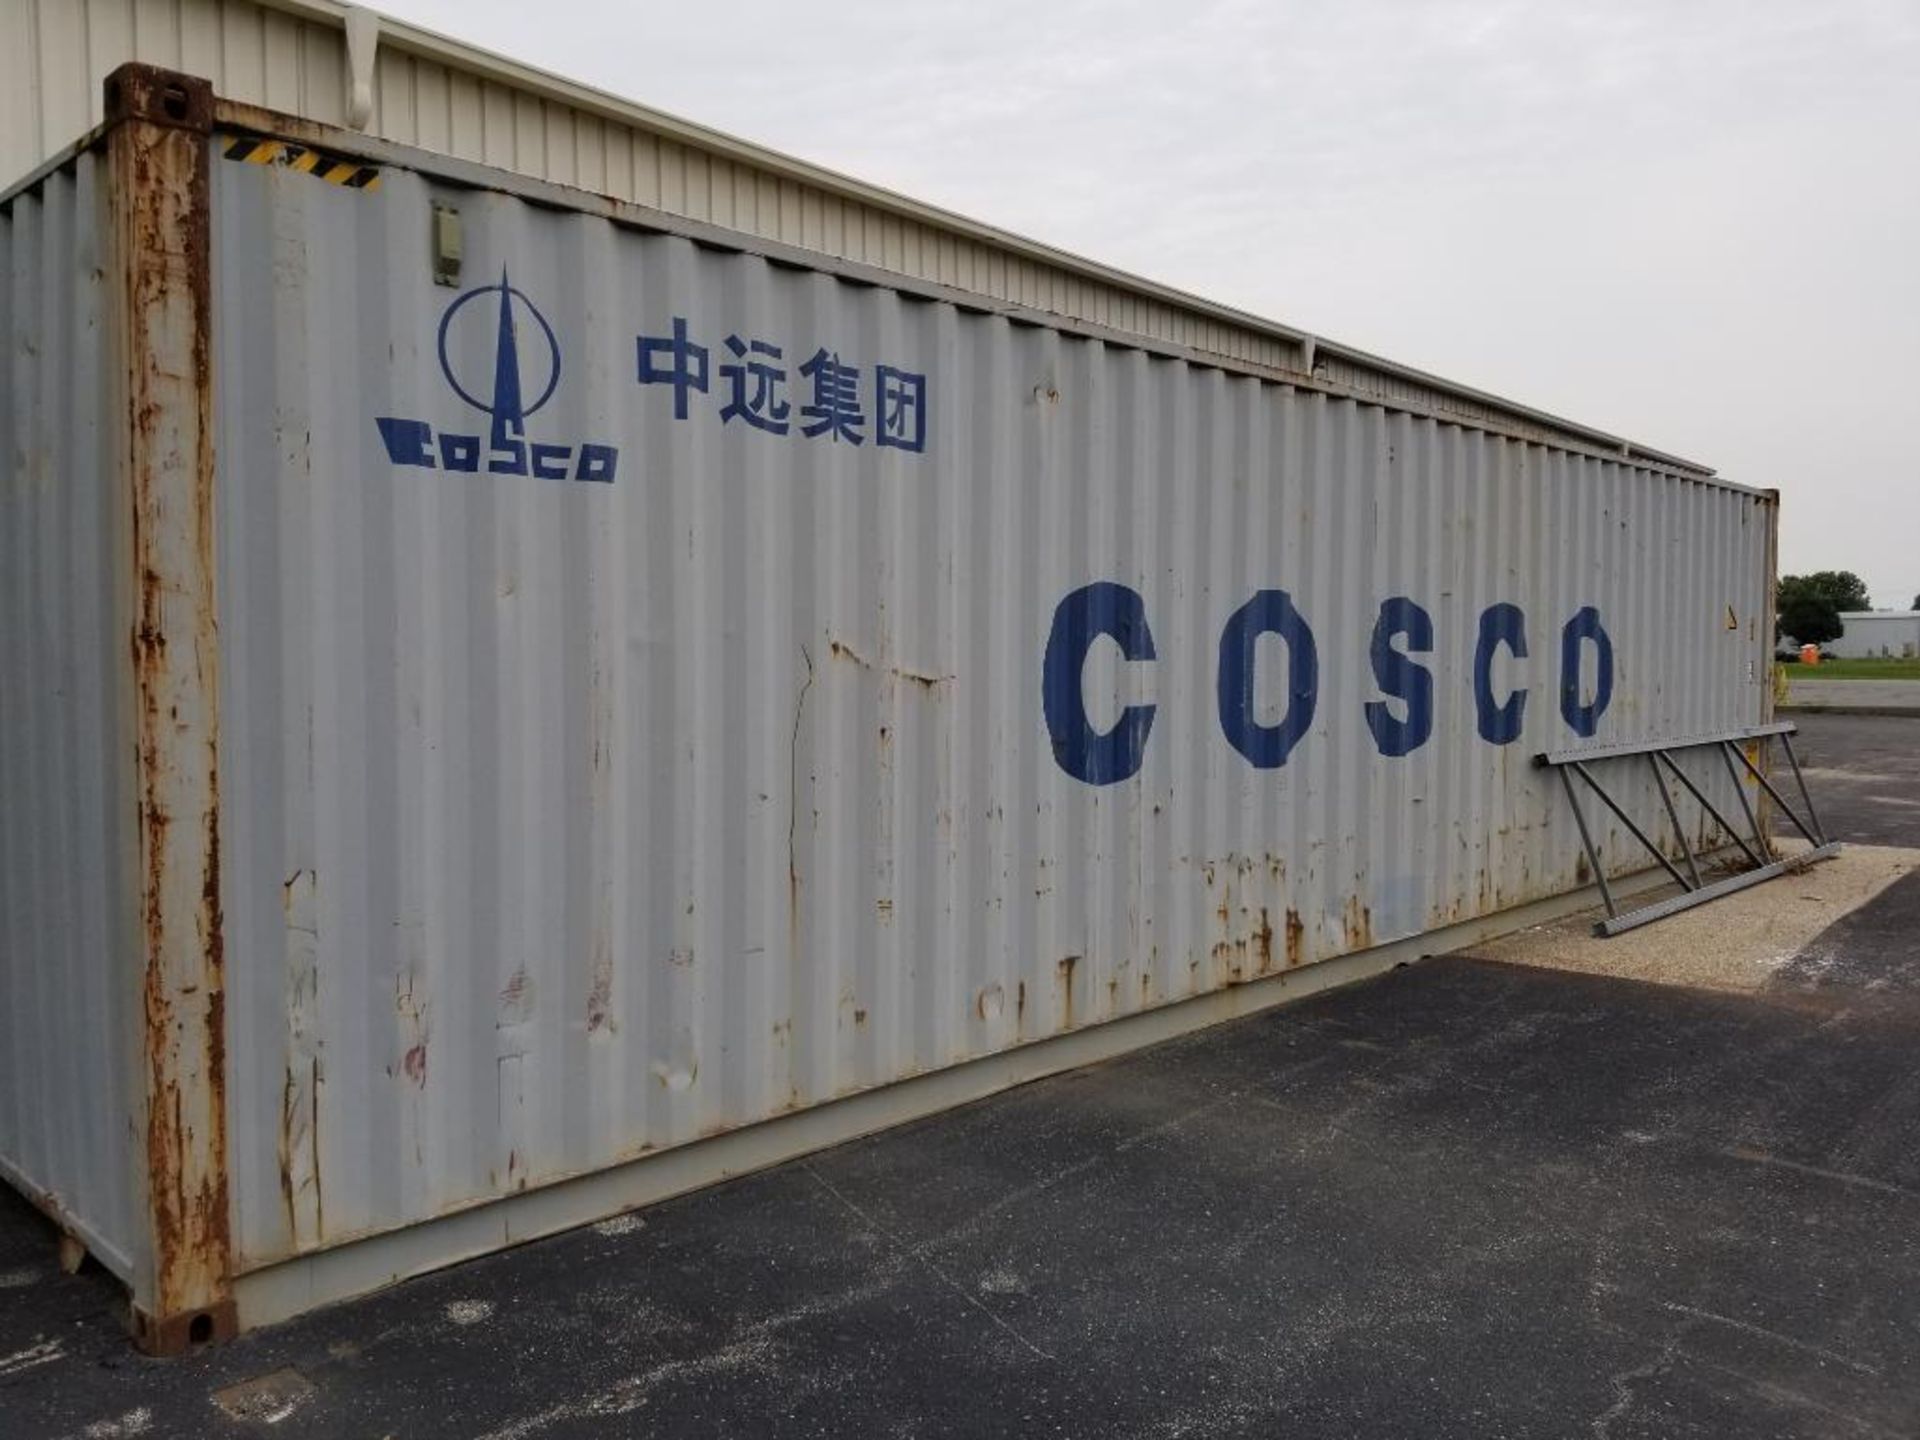 2006 Storage container. 40ft length. Type CX02-41FLR. ID# CBHU841694B. Max gross weight 71,650lbs.